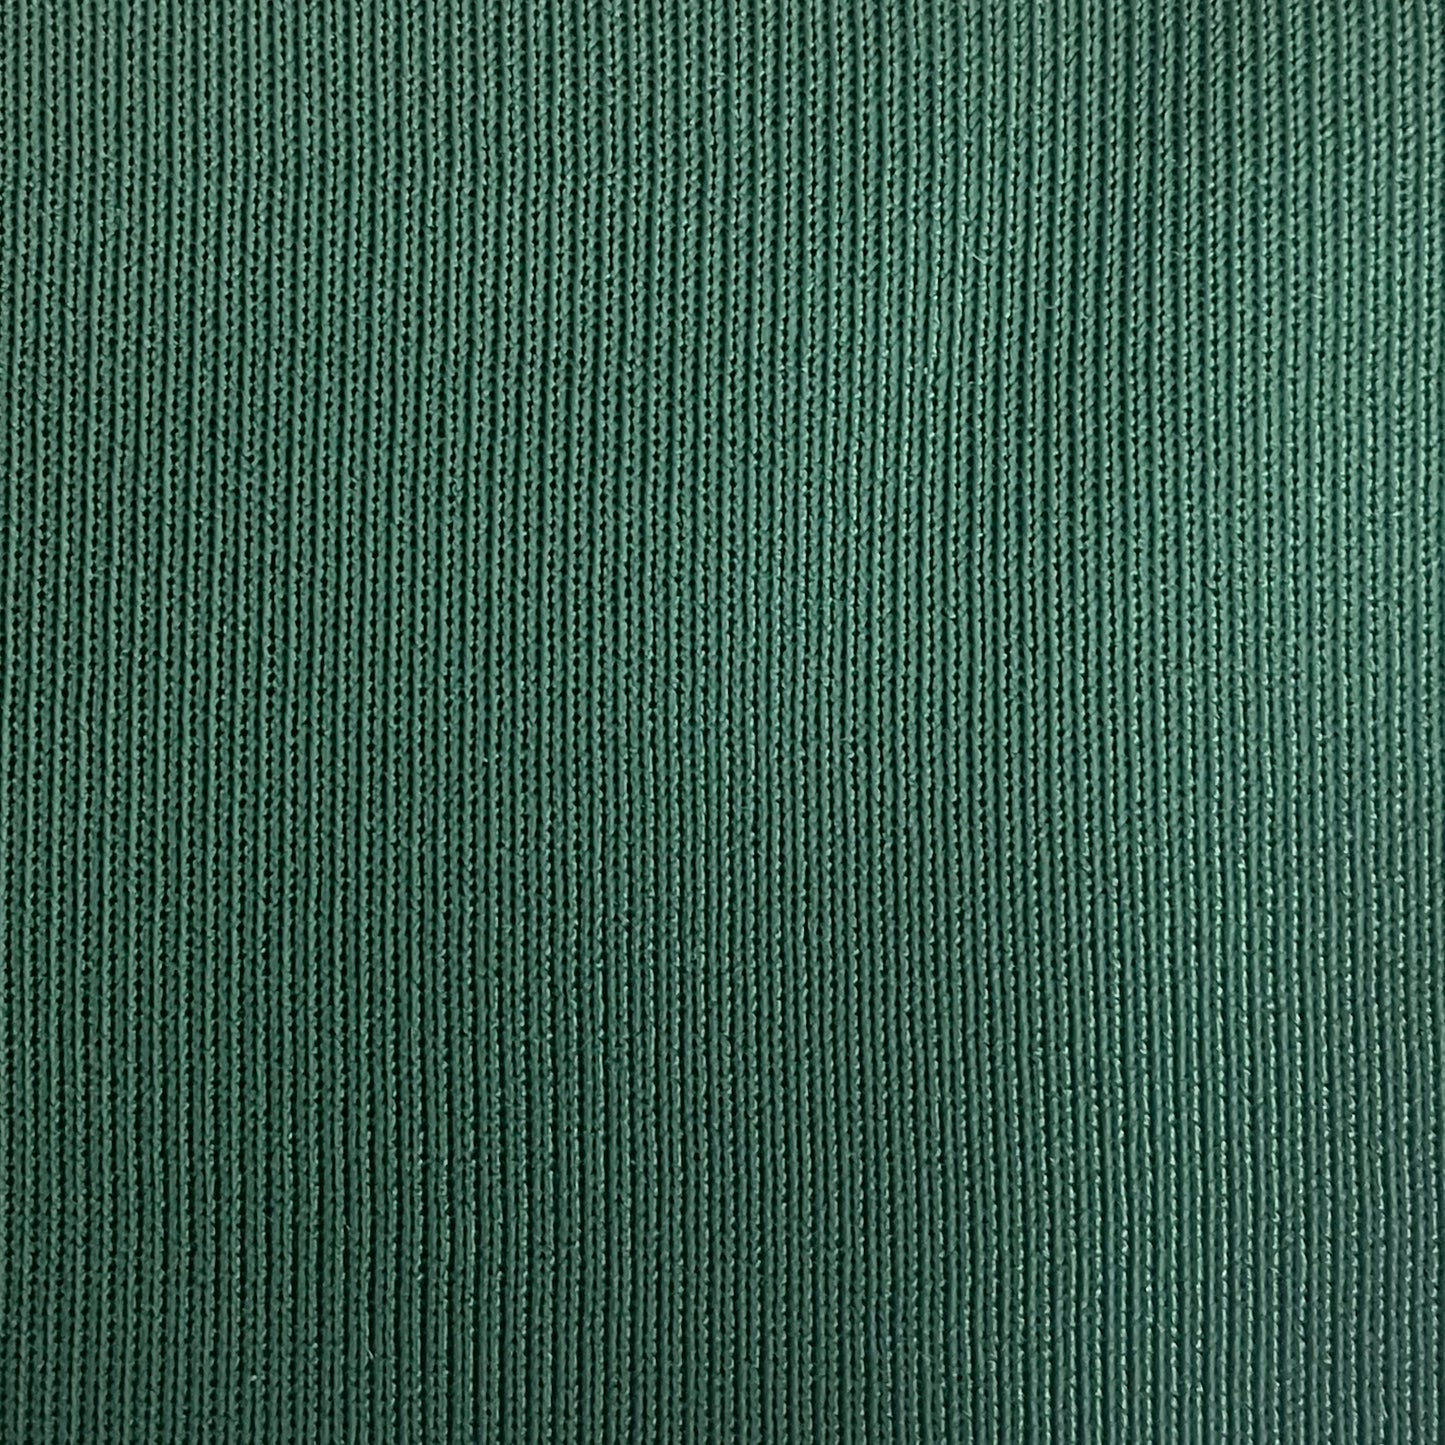 Heavyweight Nylon / Spandex Jersey in Team colors (Sold per Yard)